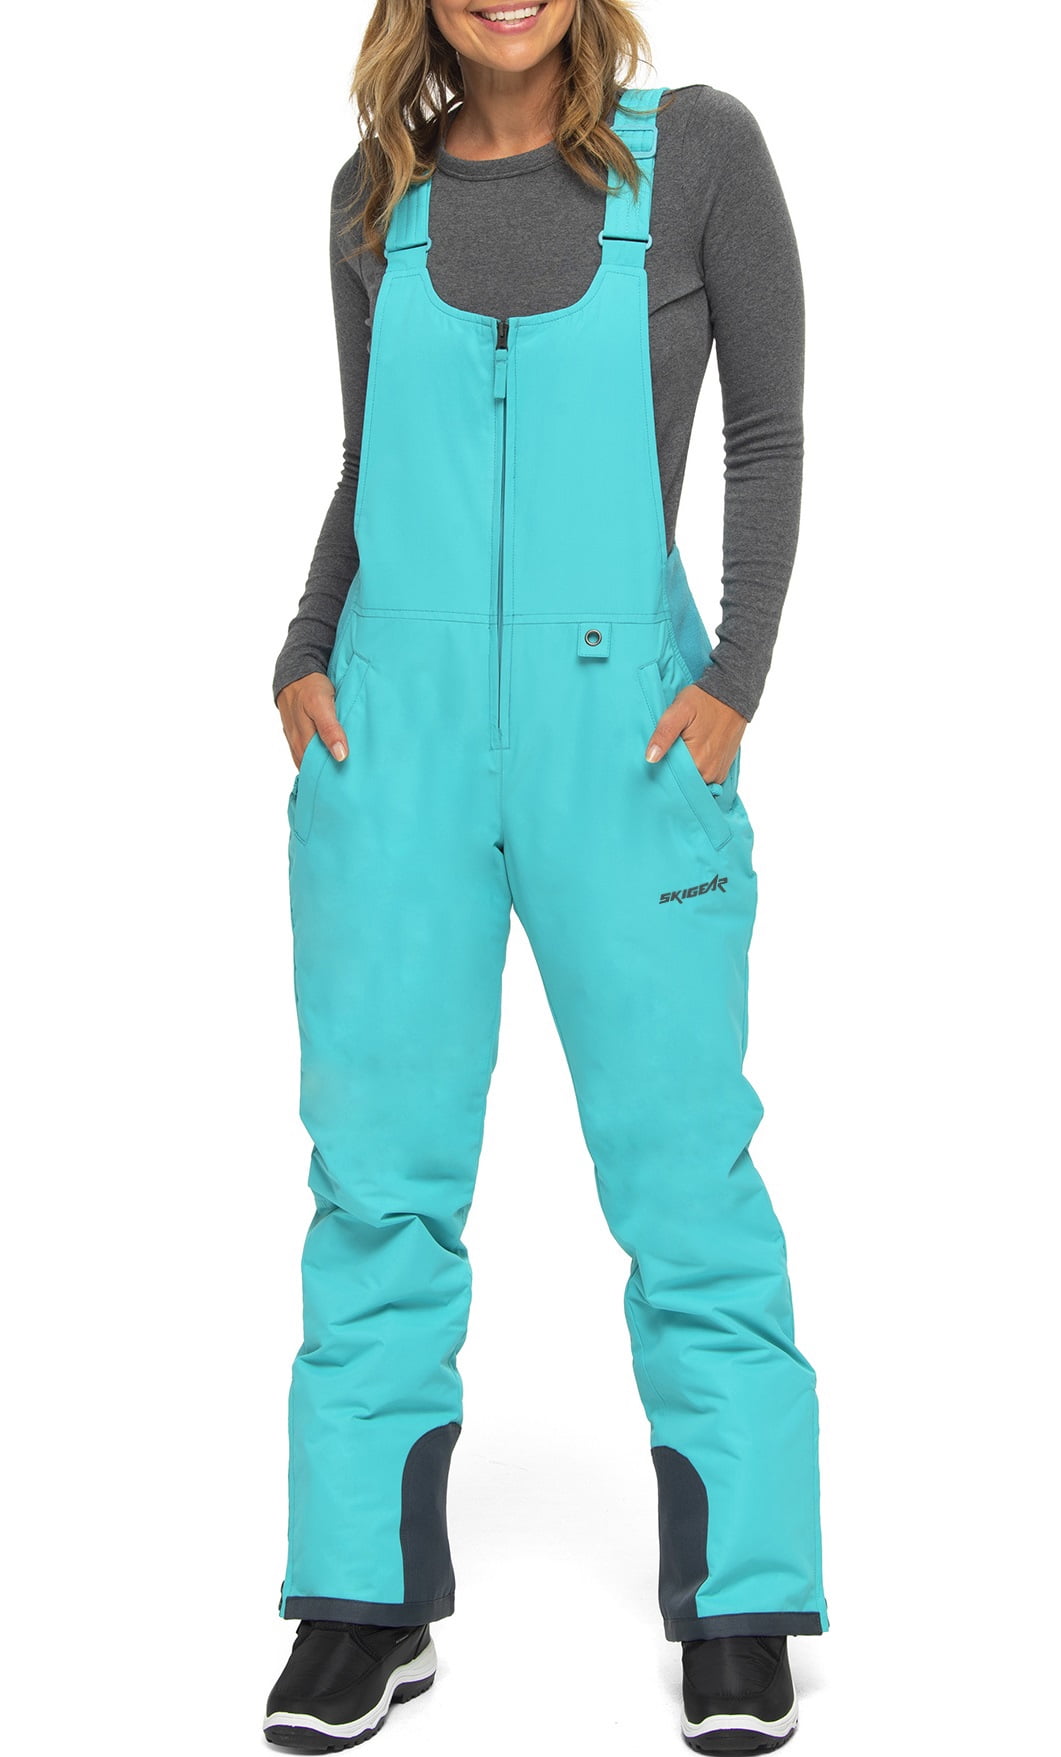 SkiGear by Arctix Women's and Plus Size Winter Snow Bib Overall Pant 